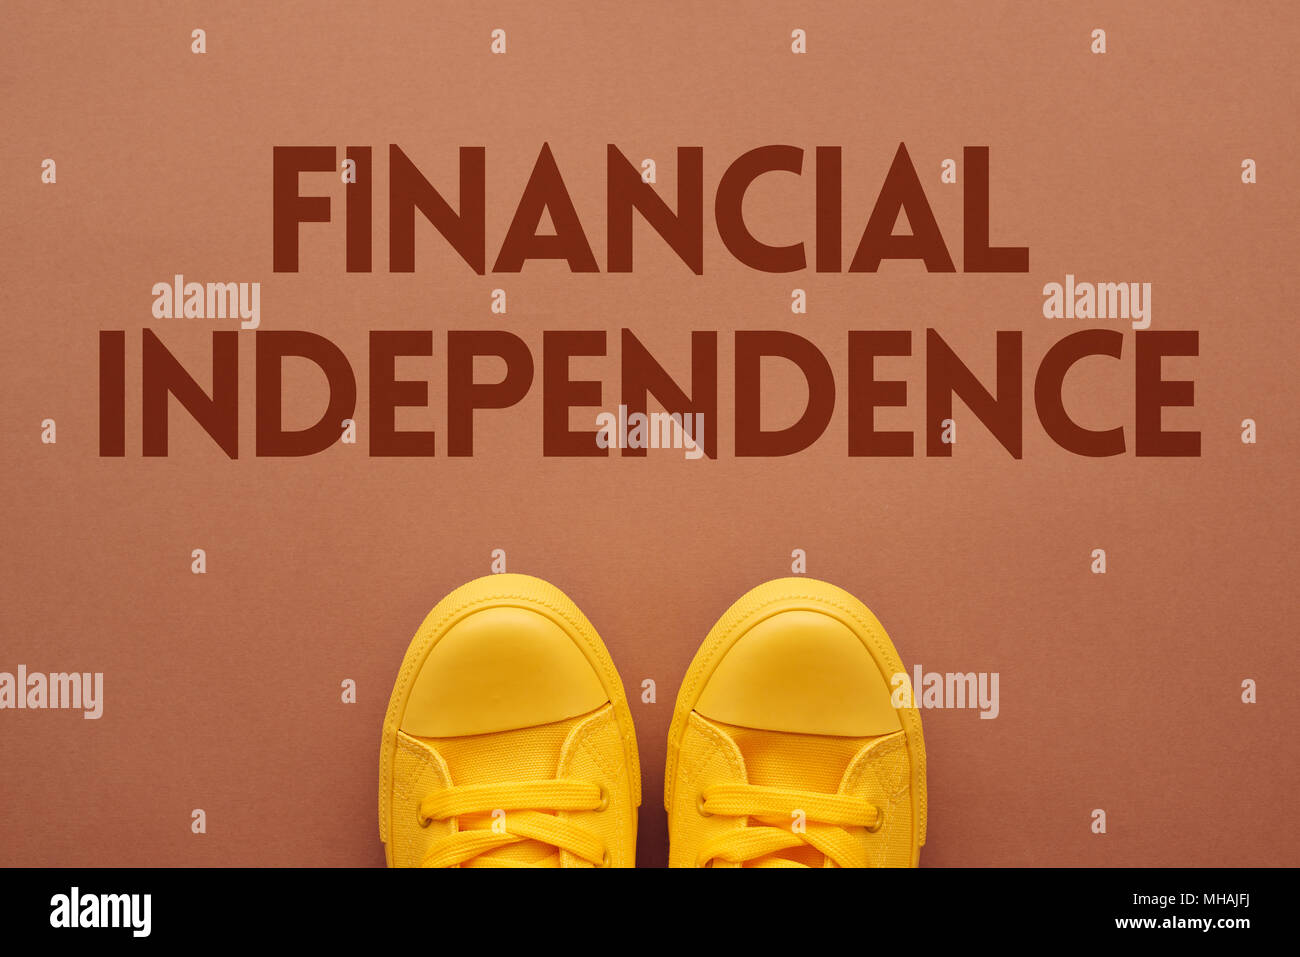 Financial independence concept, young person in yellow sneakers standing over the text, top view Stock Photo